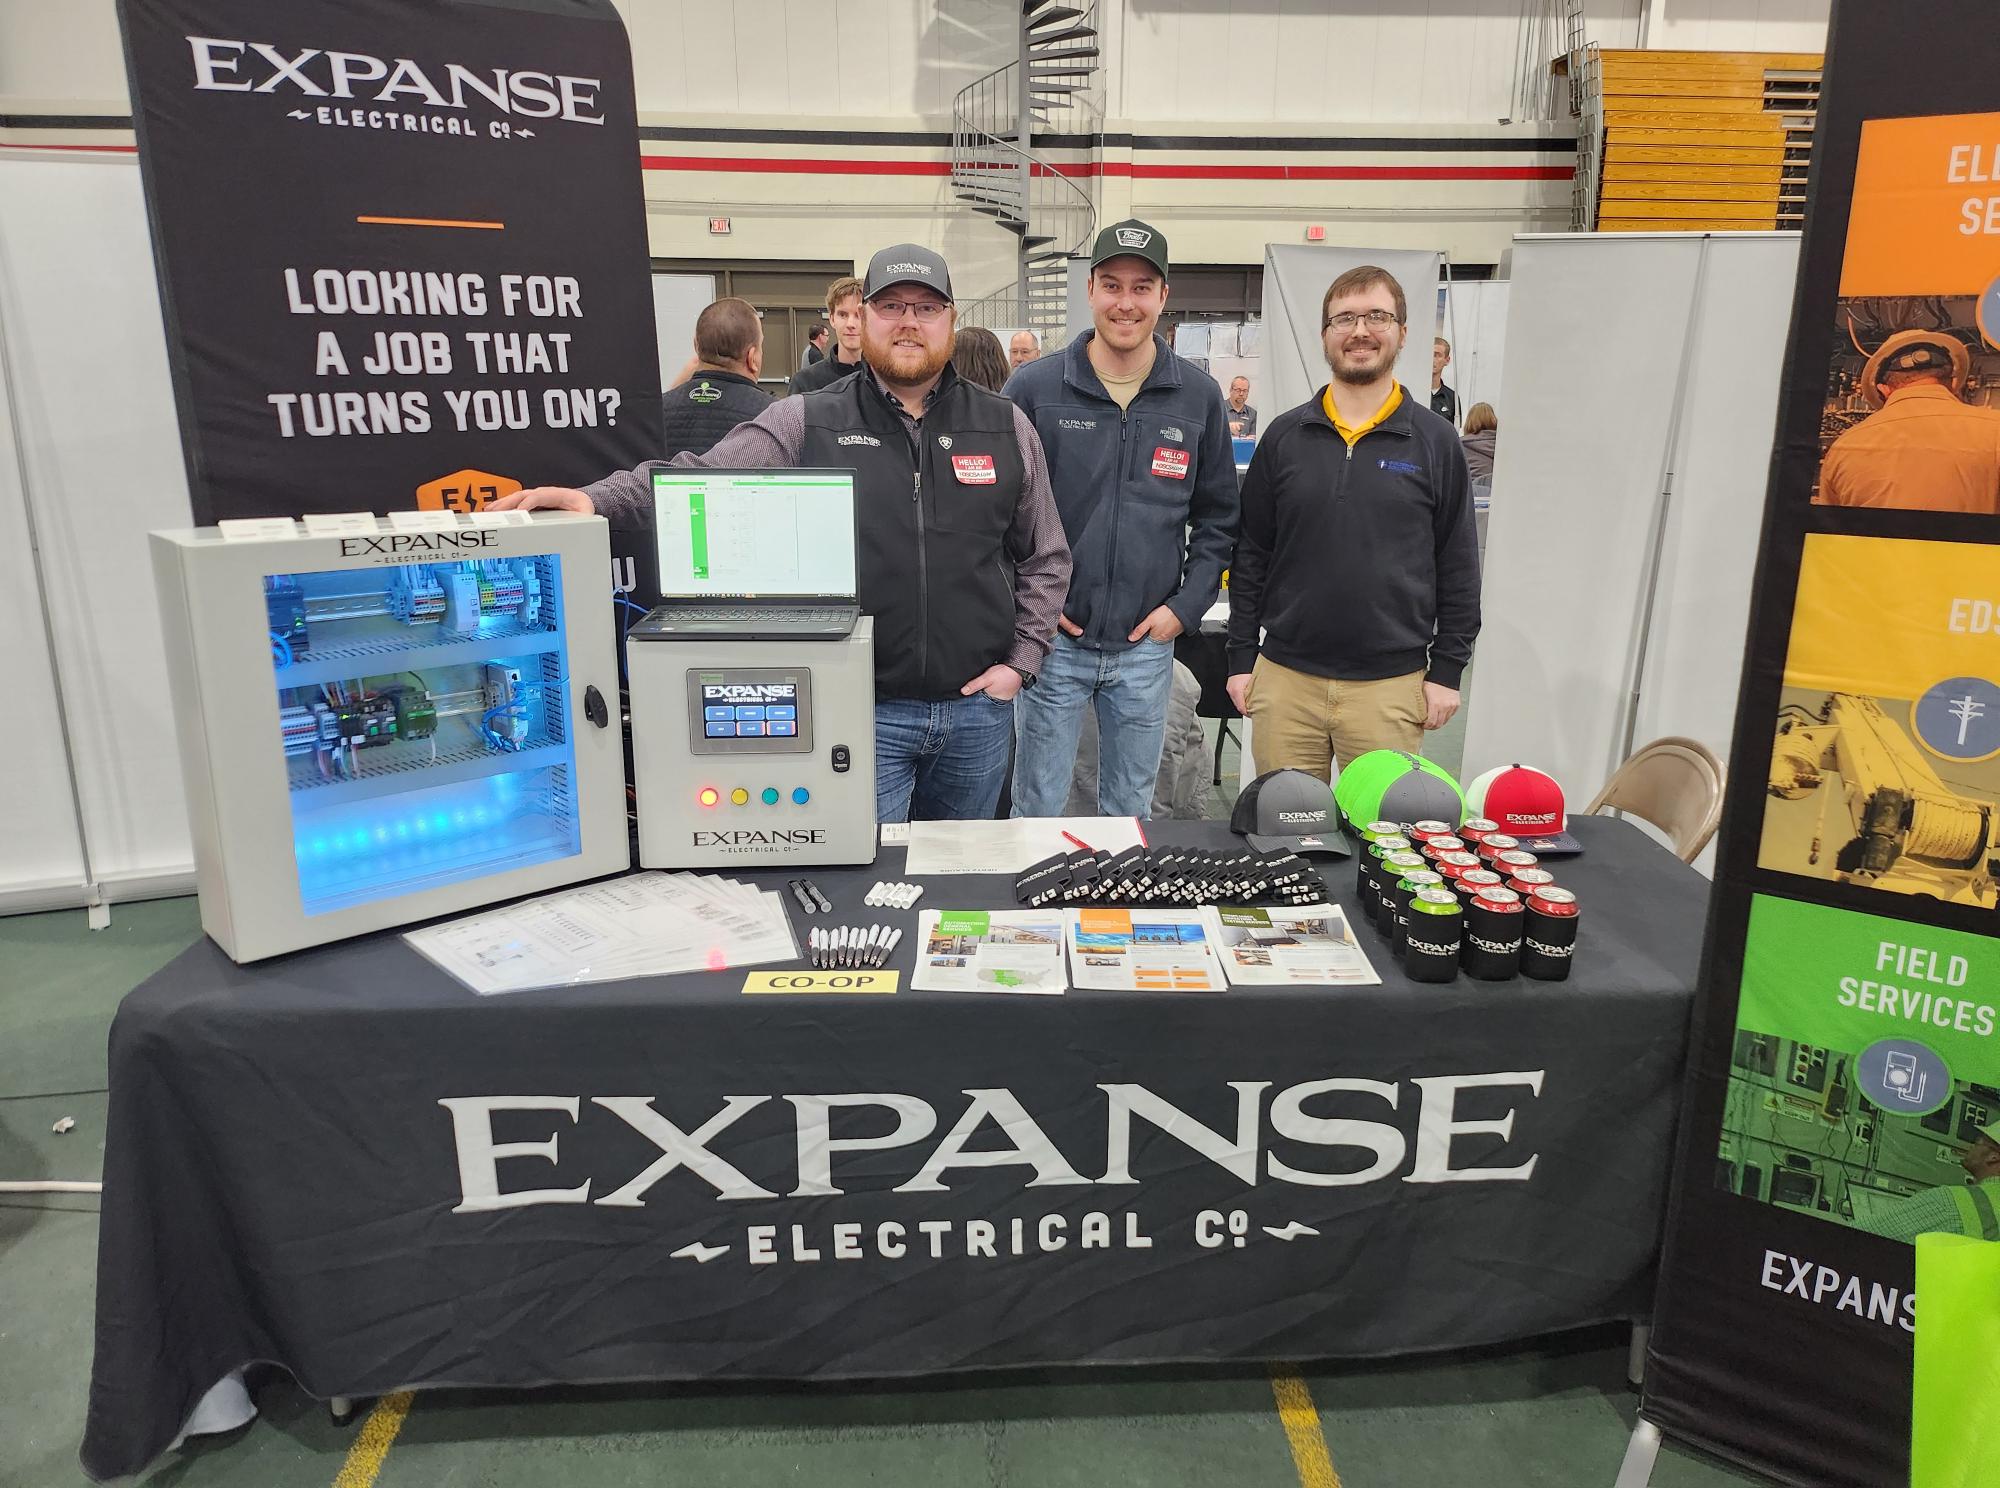 A Golden Path employee and two Expanse employees are pictured at the Expanse table at the NDSCS Career Fair